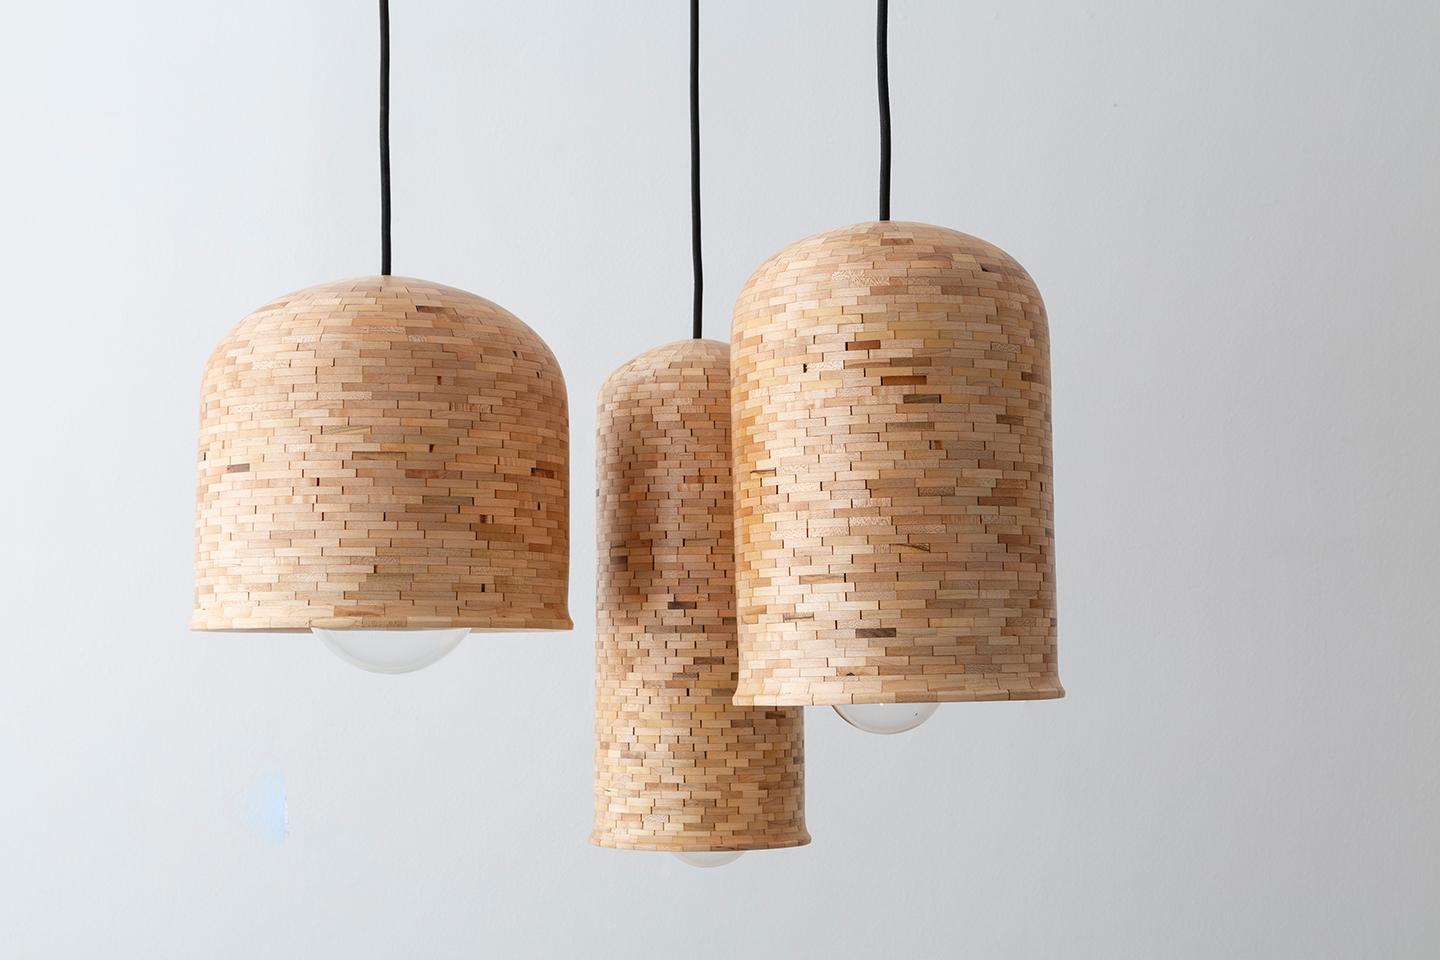 American Wooden STACKED Illuminated Hanging Bell-Shaped Sculpture, 